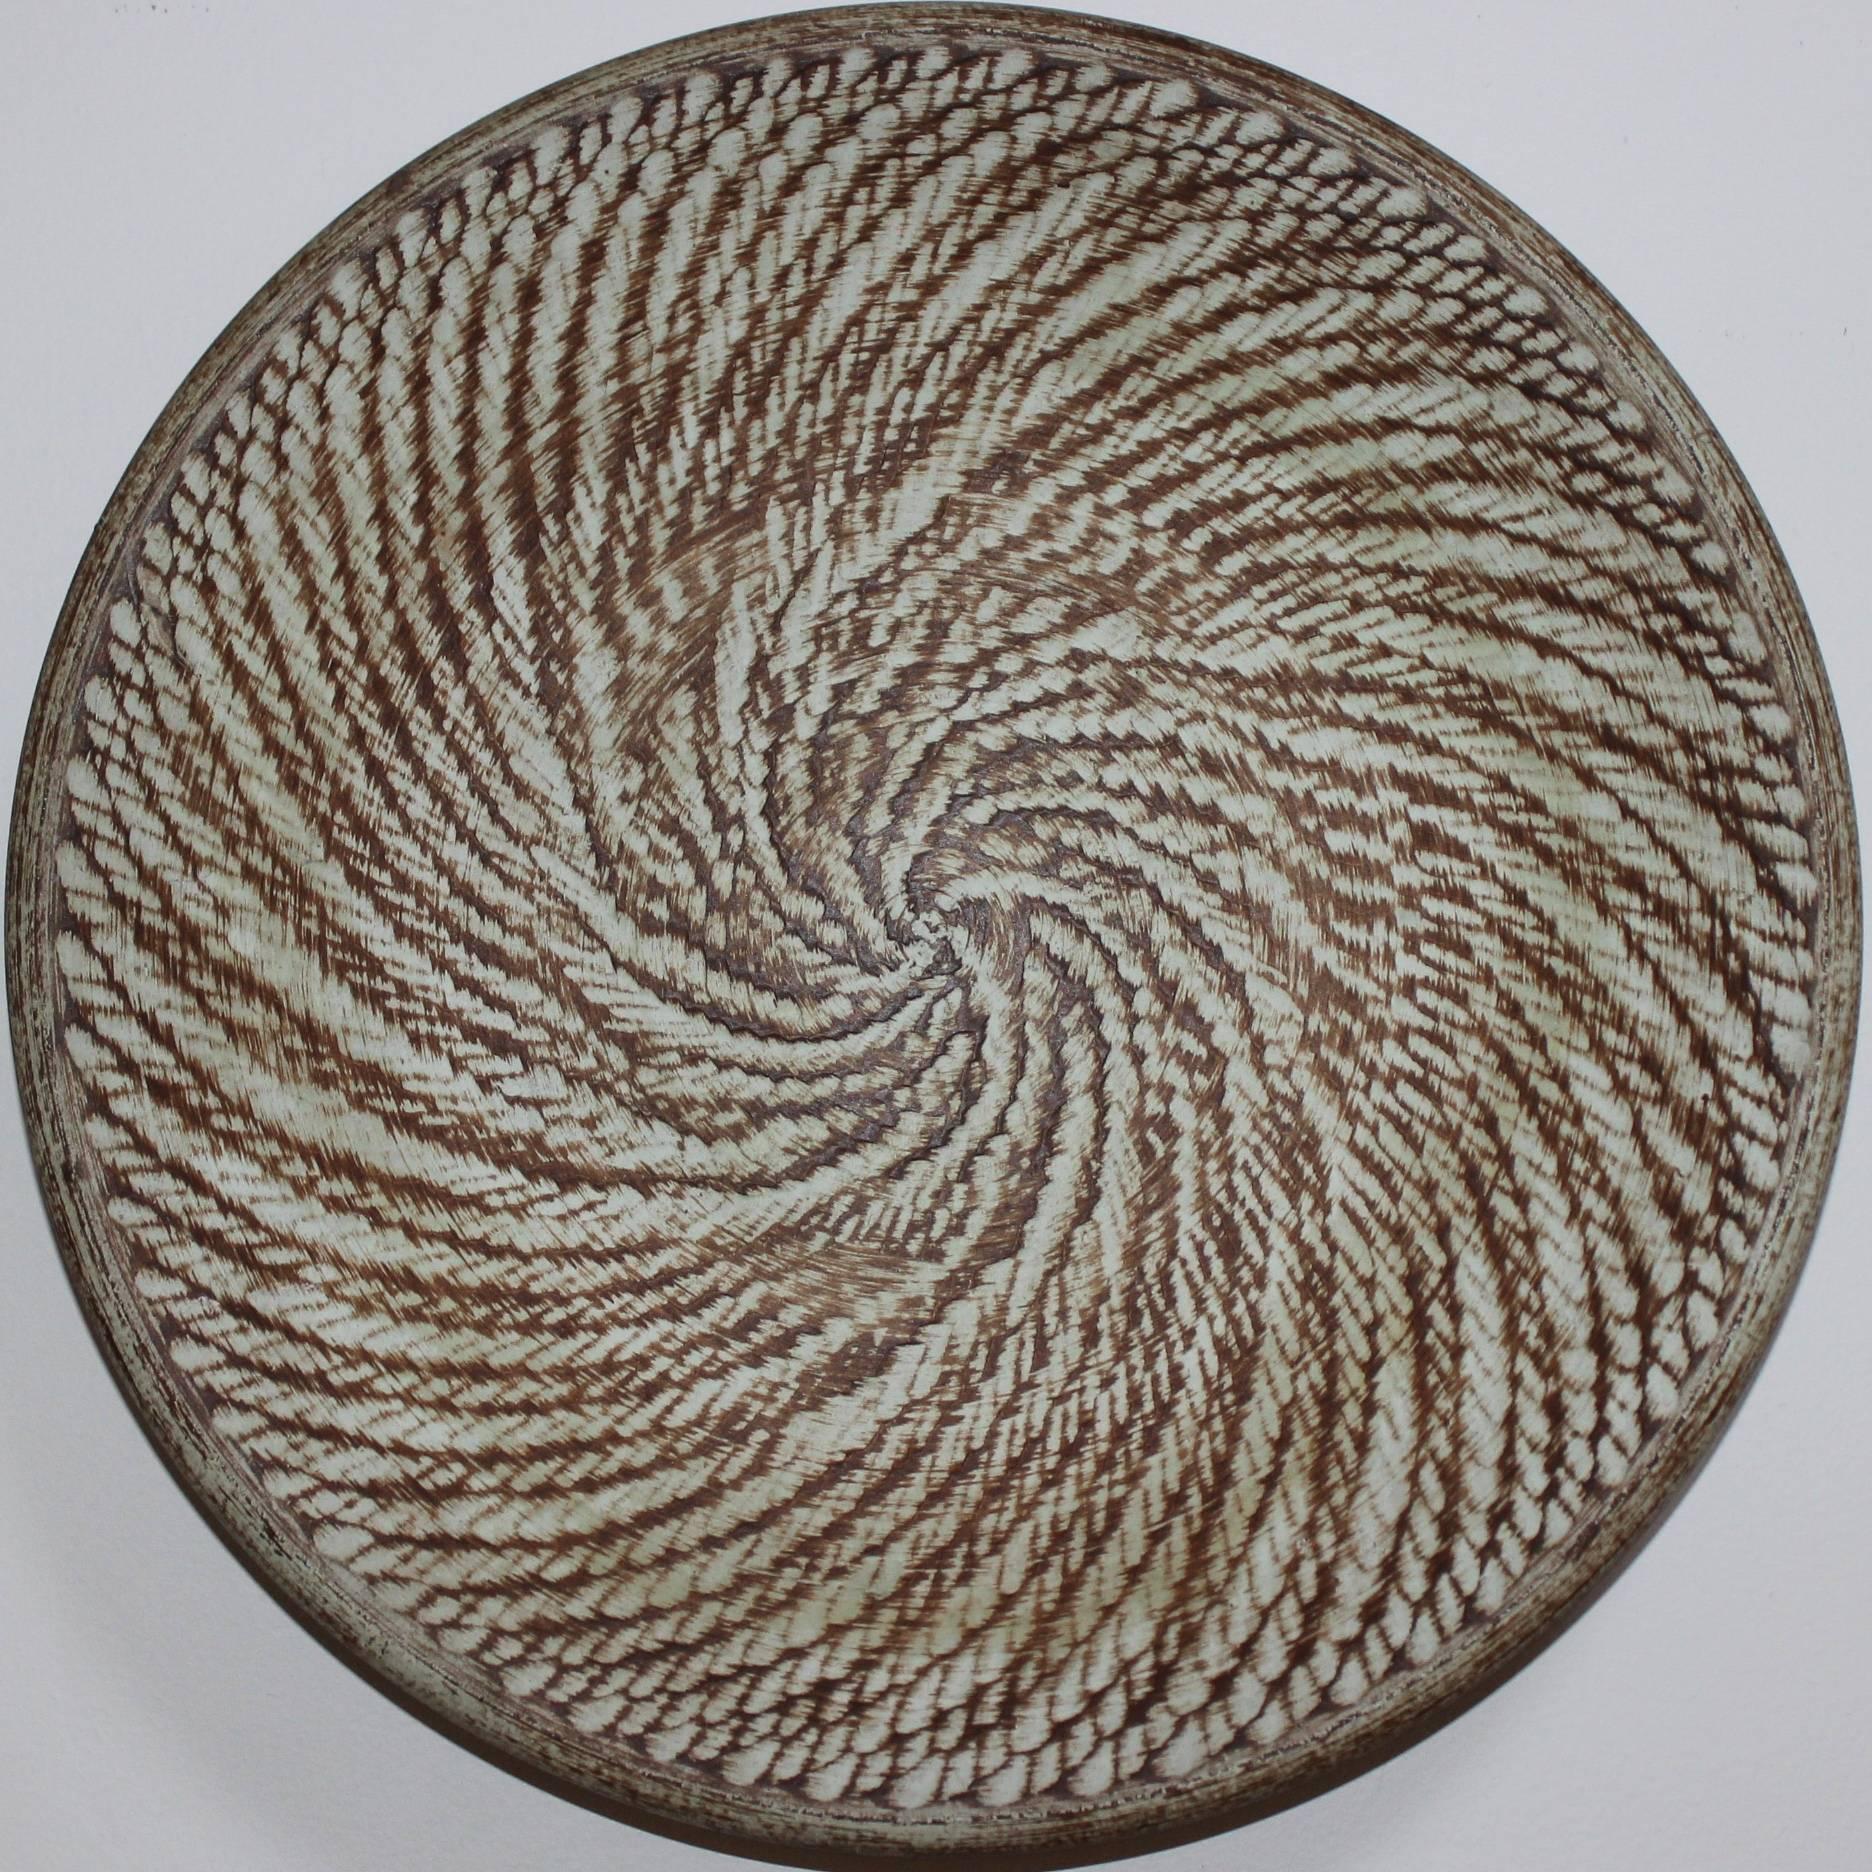 1970s modern decorative wall hanging plate from Germany.